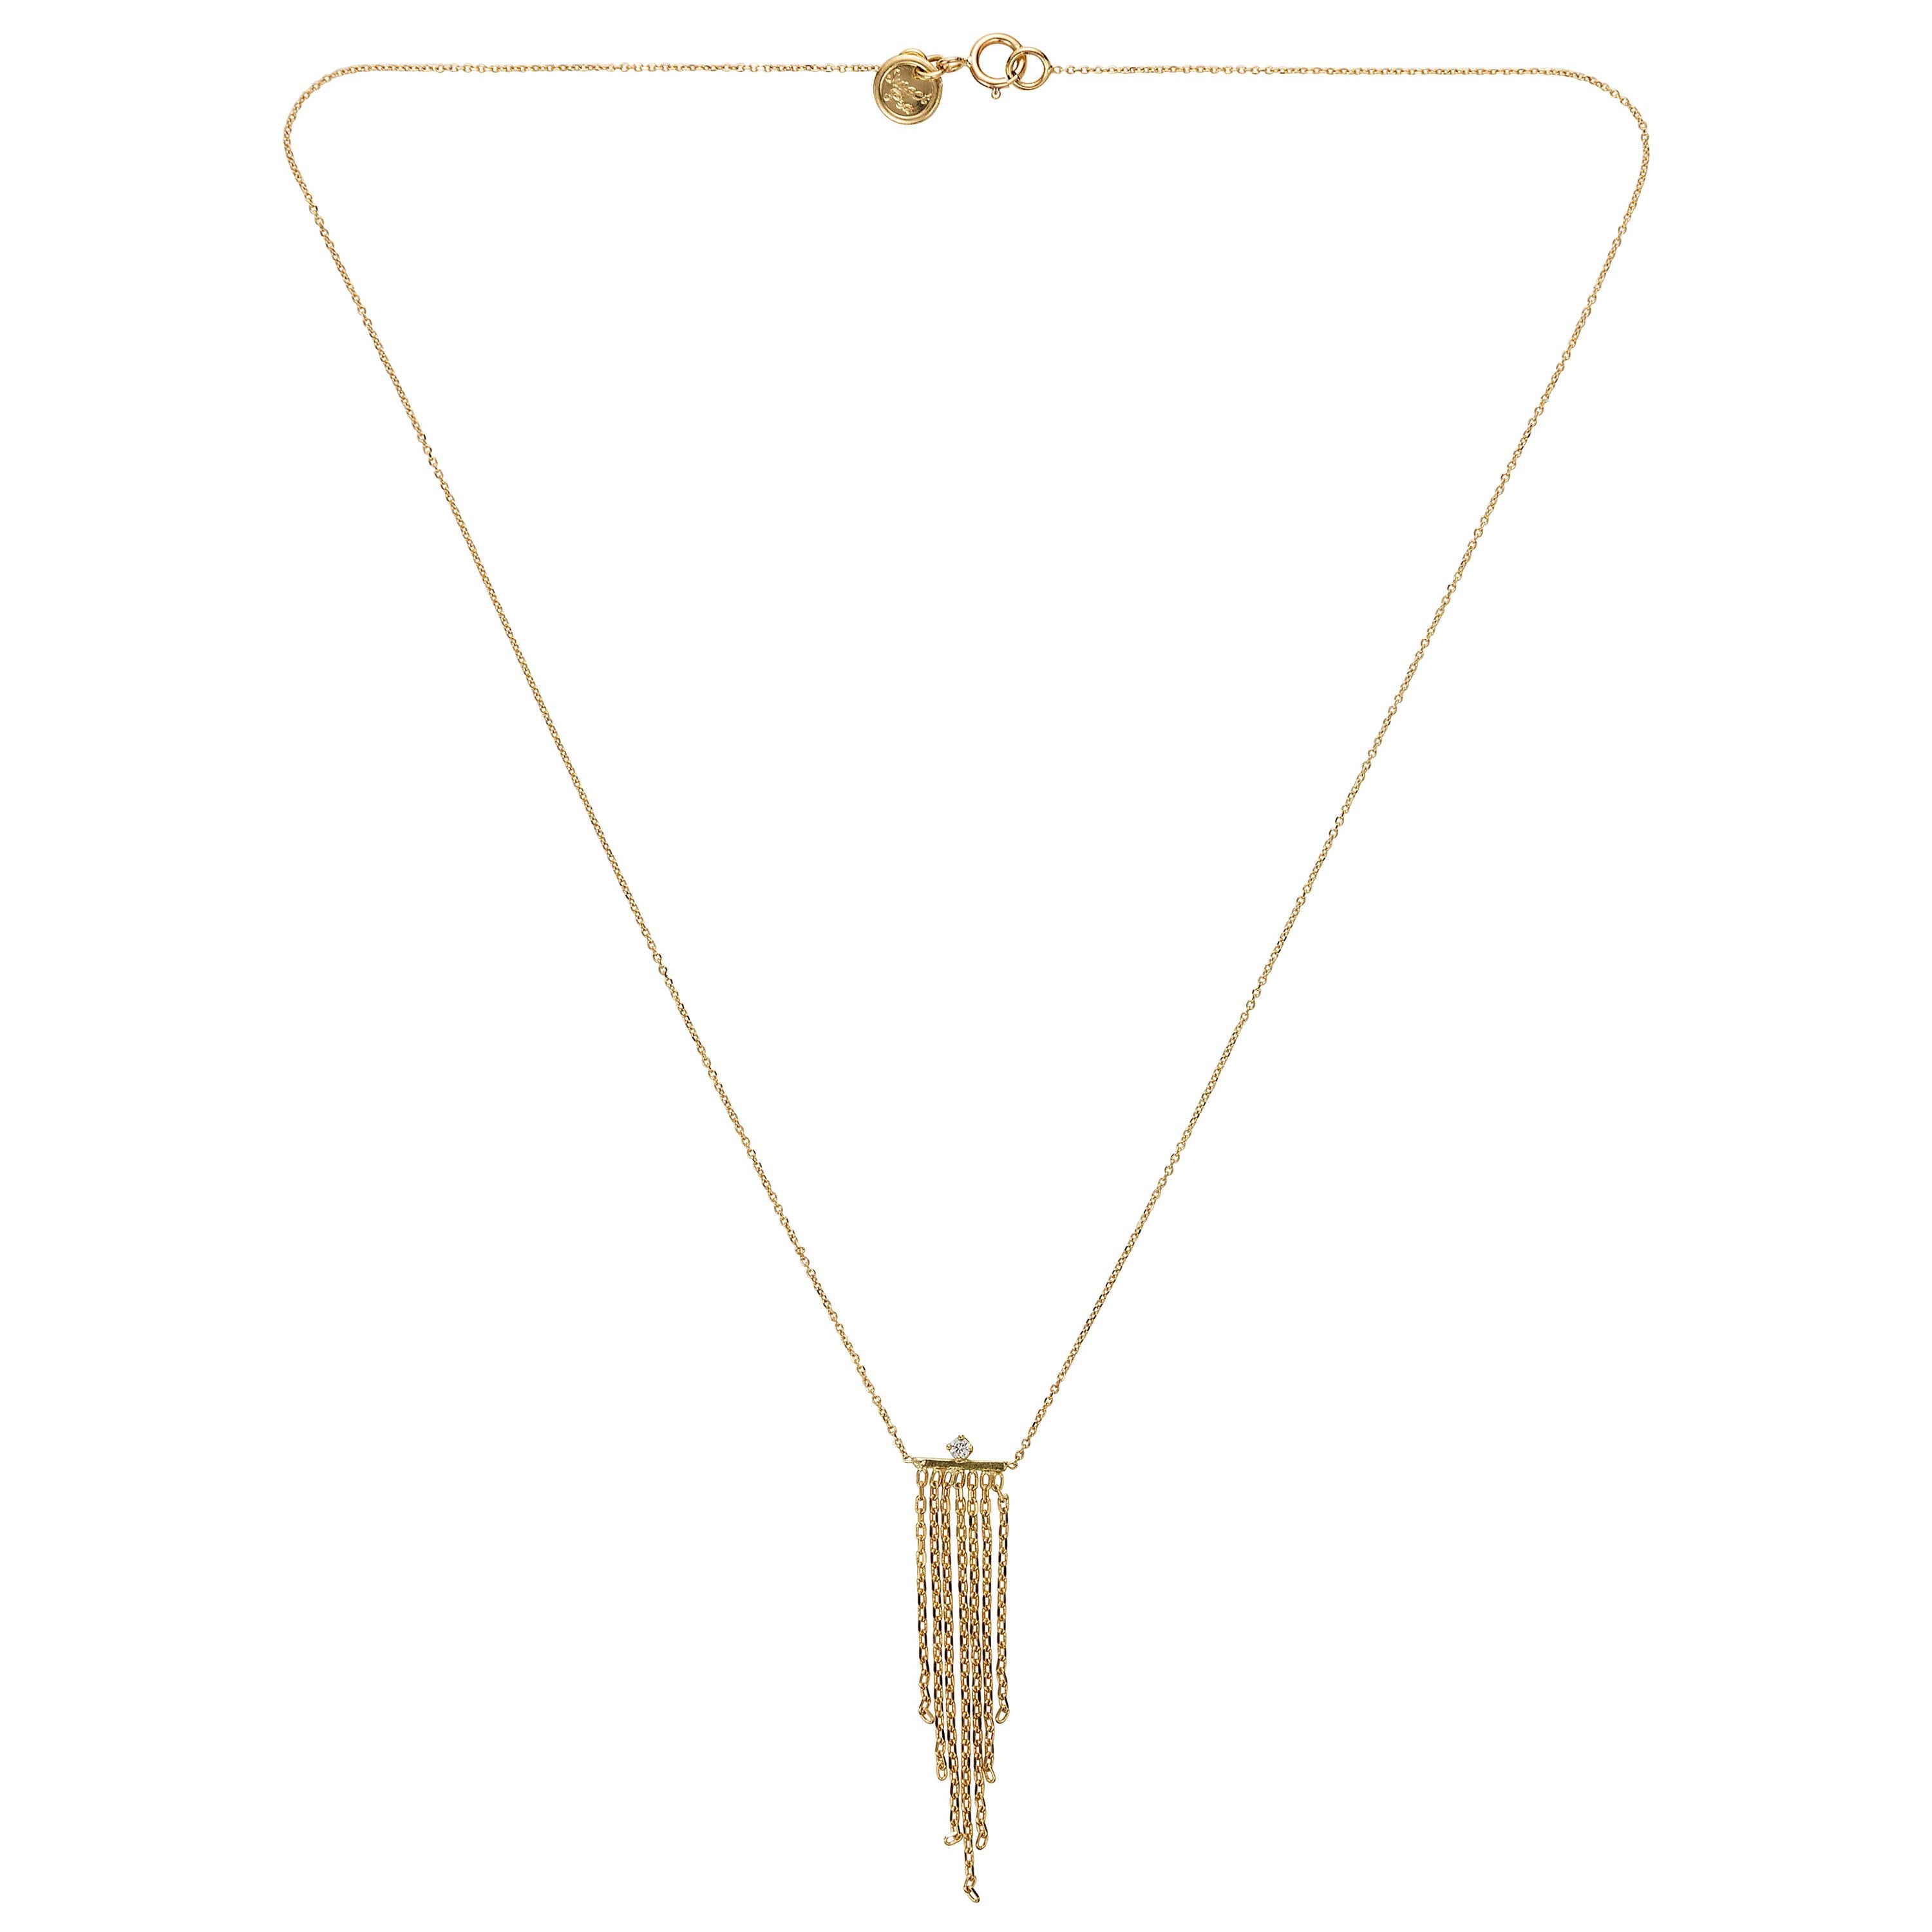 Sweet Pea 18 Karat Yellow Gold Necklace with White Diamond and Chain Fringe For Sale